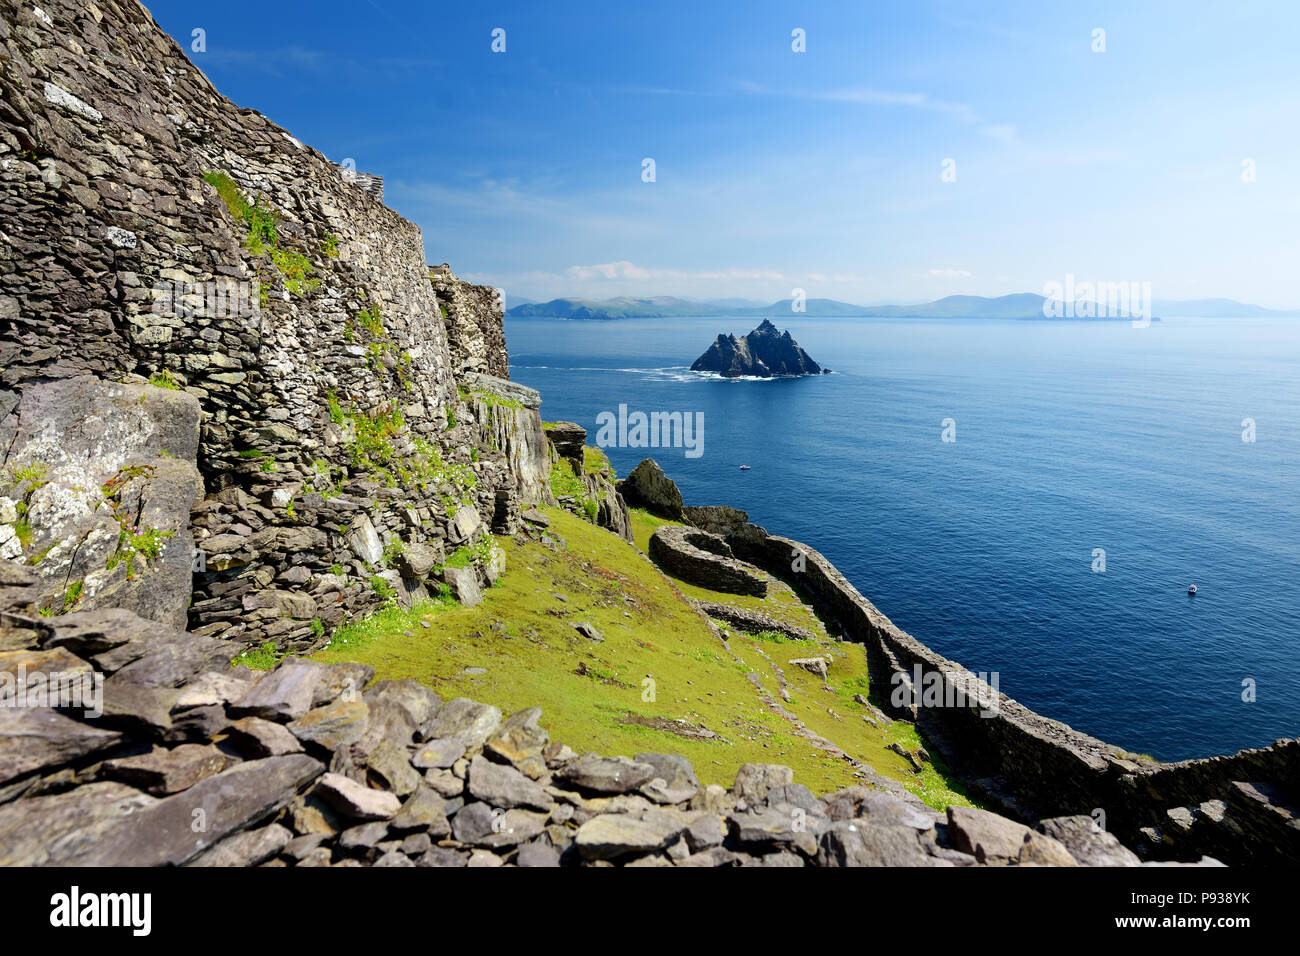 Skellig Michael or Great Skellig, home to the ruined remains of a Christian monastery. Inhabited by variety of seabirds, including gannets and puffins Stock Photo